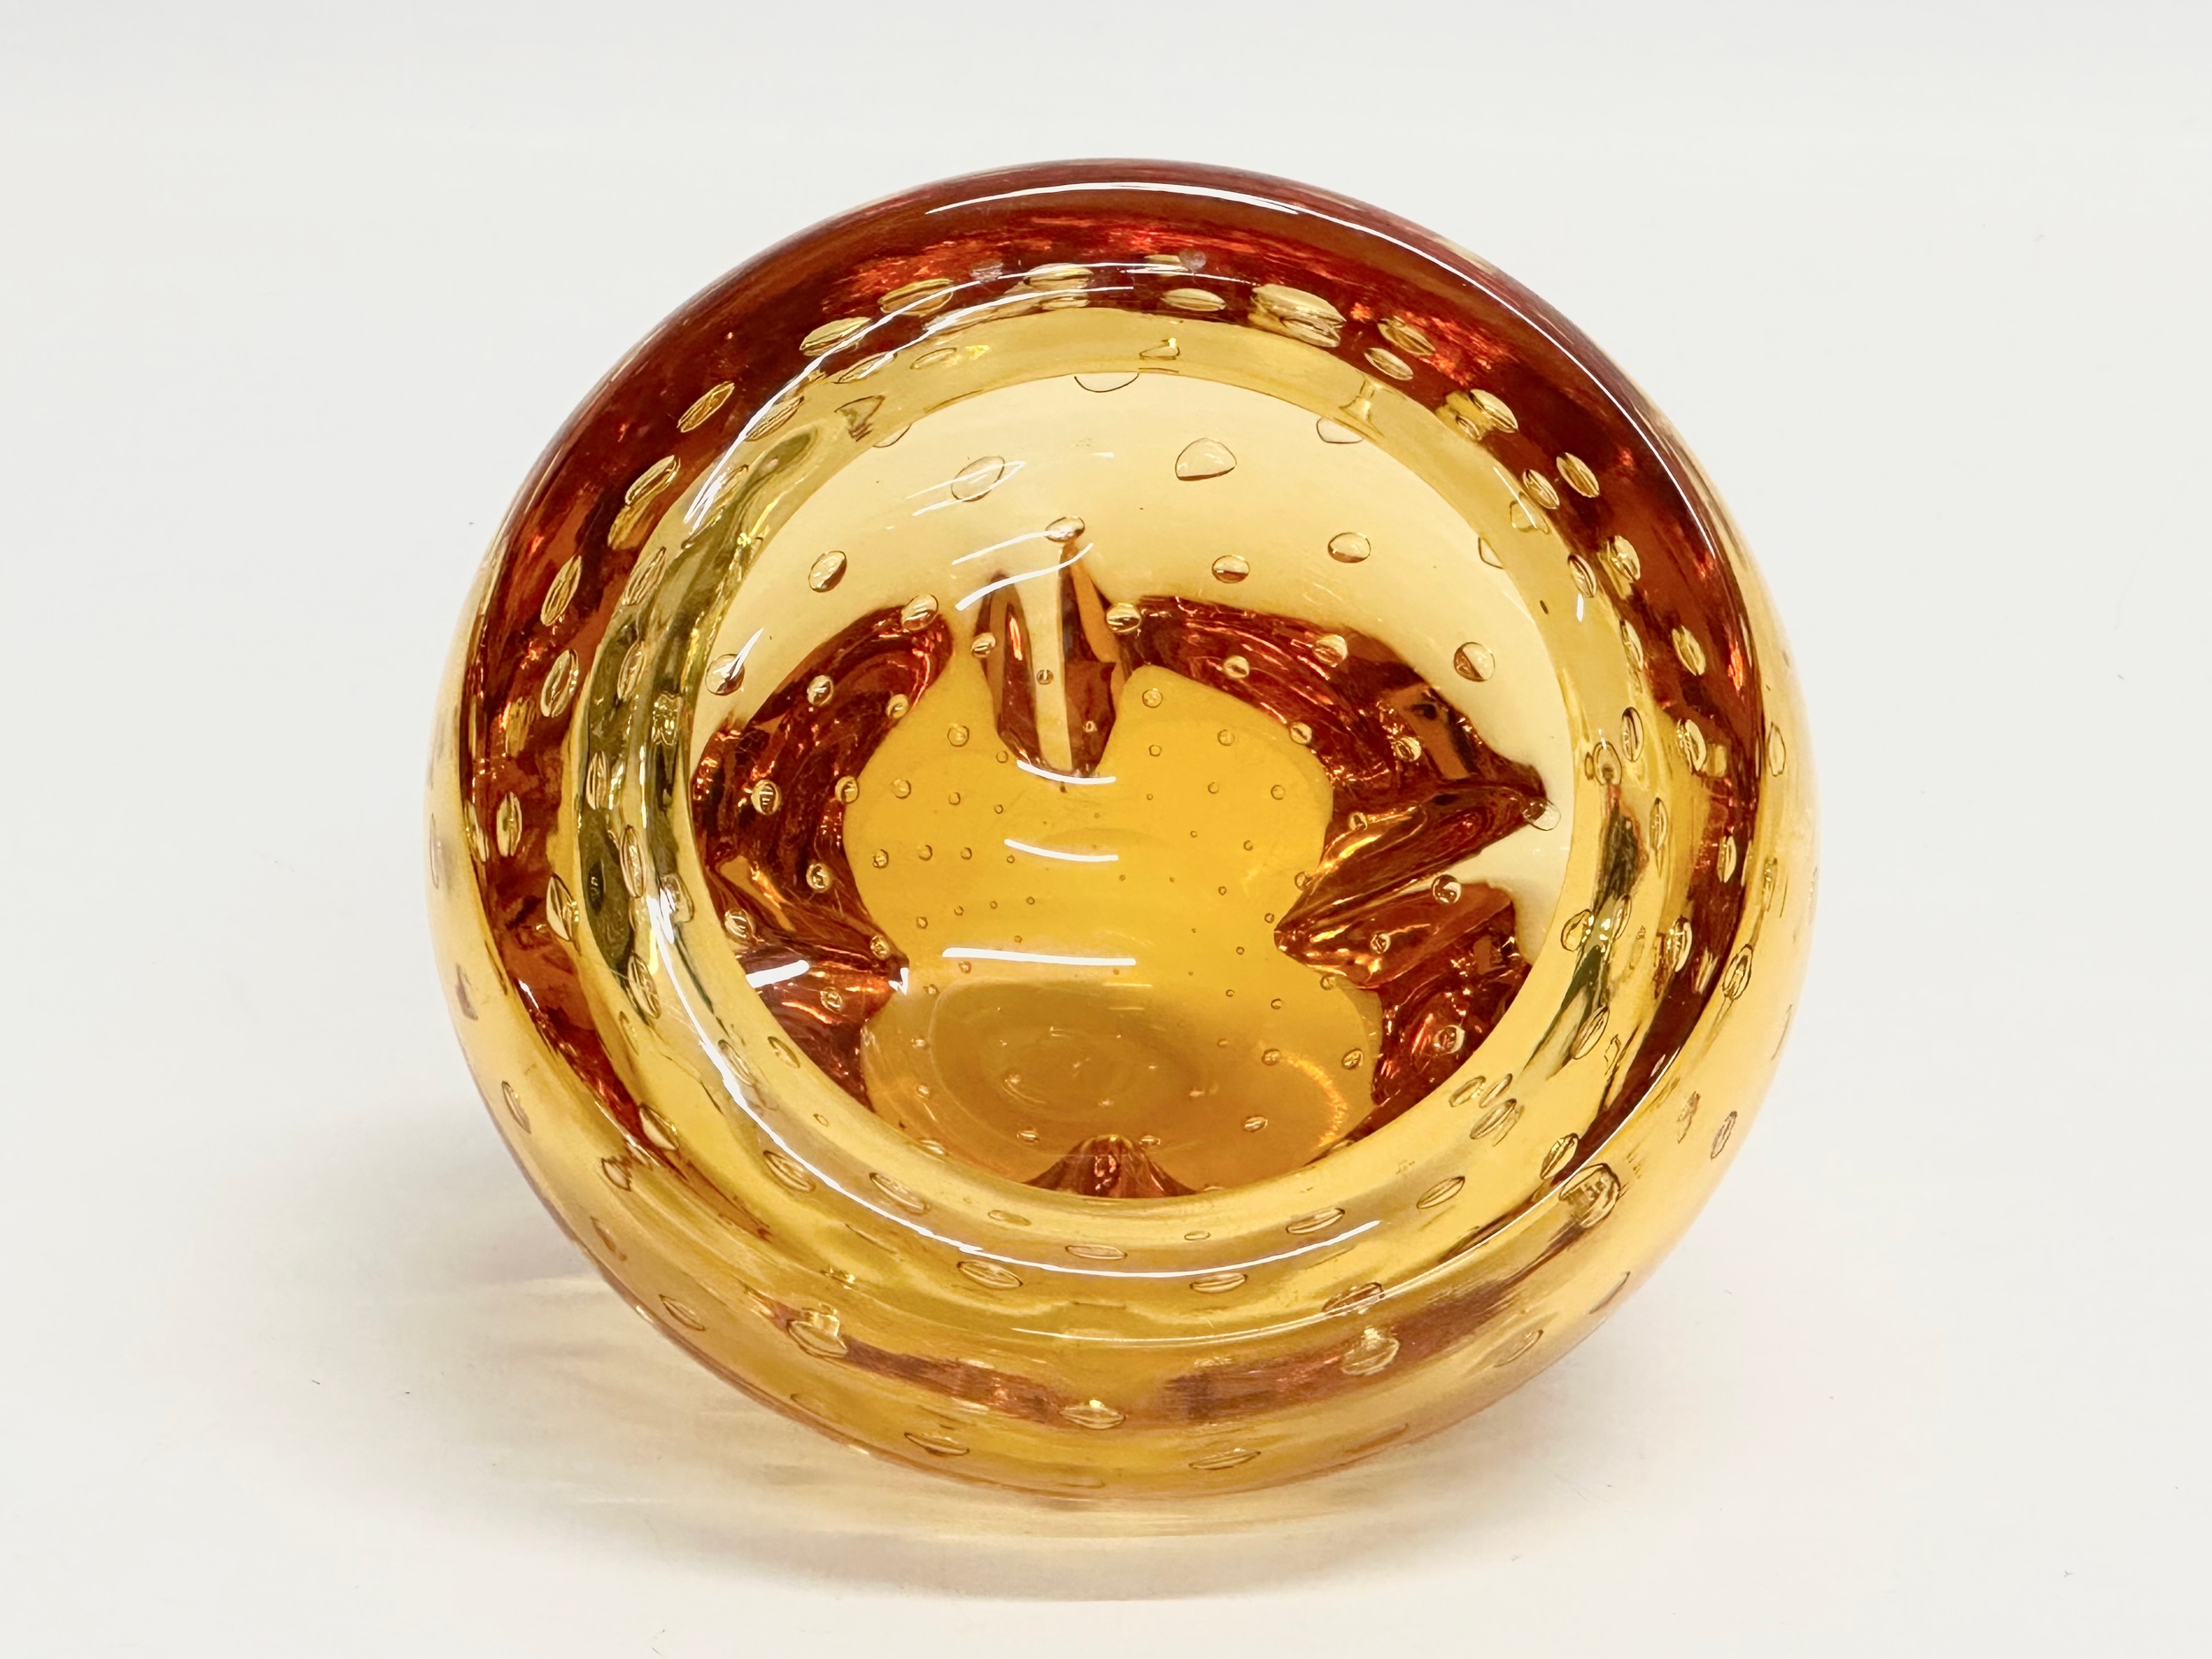 A ‘Molar’ Bubbled Bowl designed by Geoffrey Baxter for Whitefriars. 12x7cm - Image 2 of 3